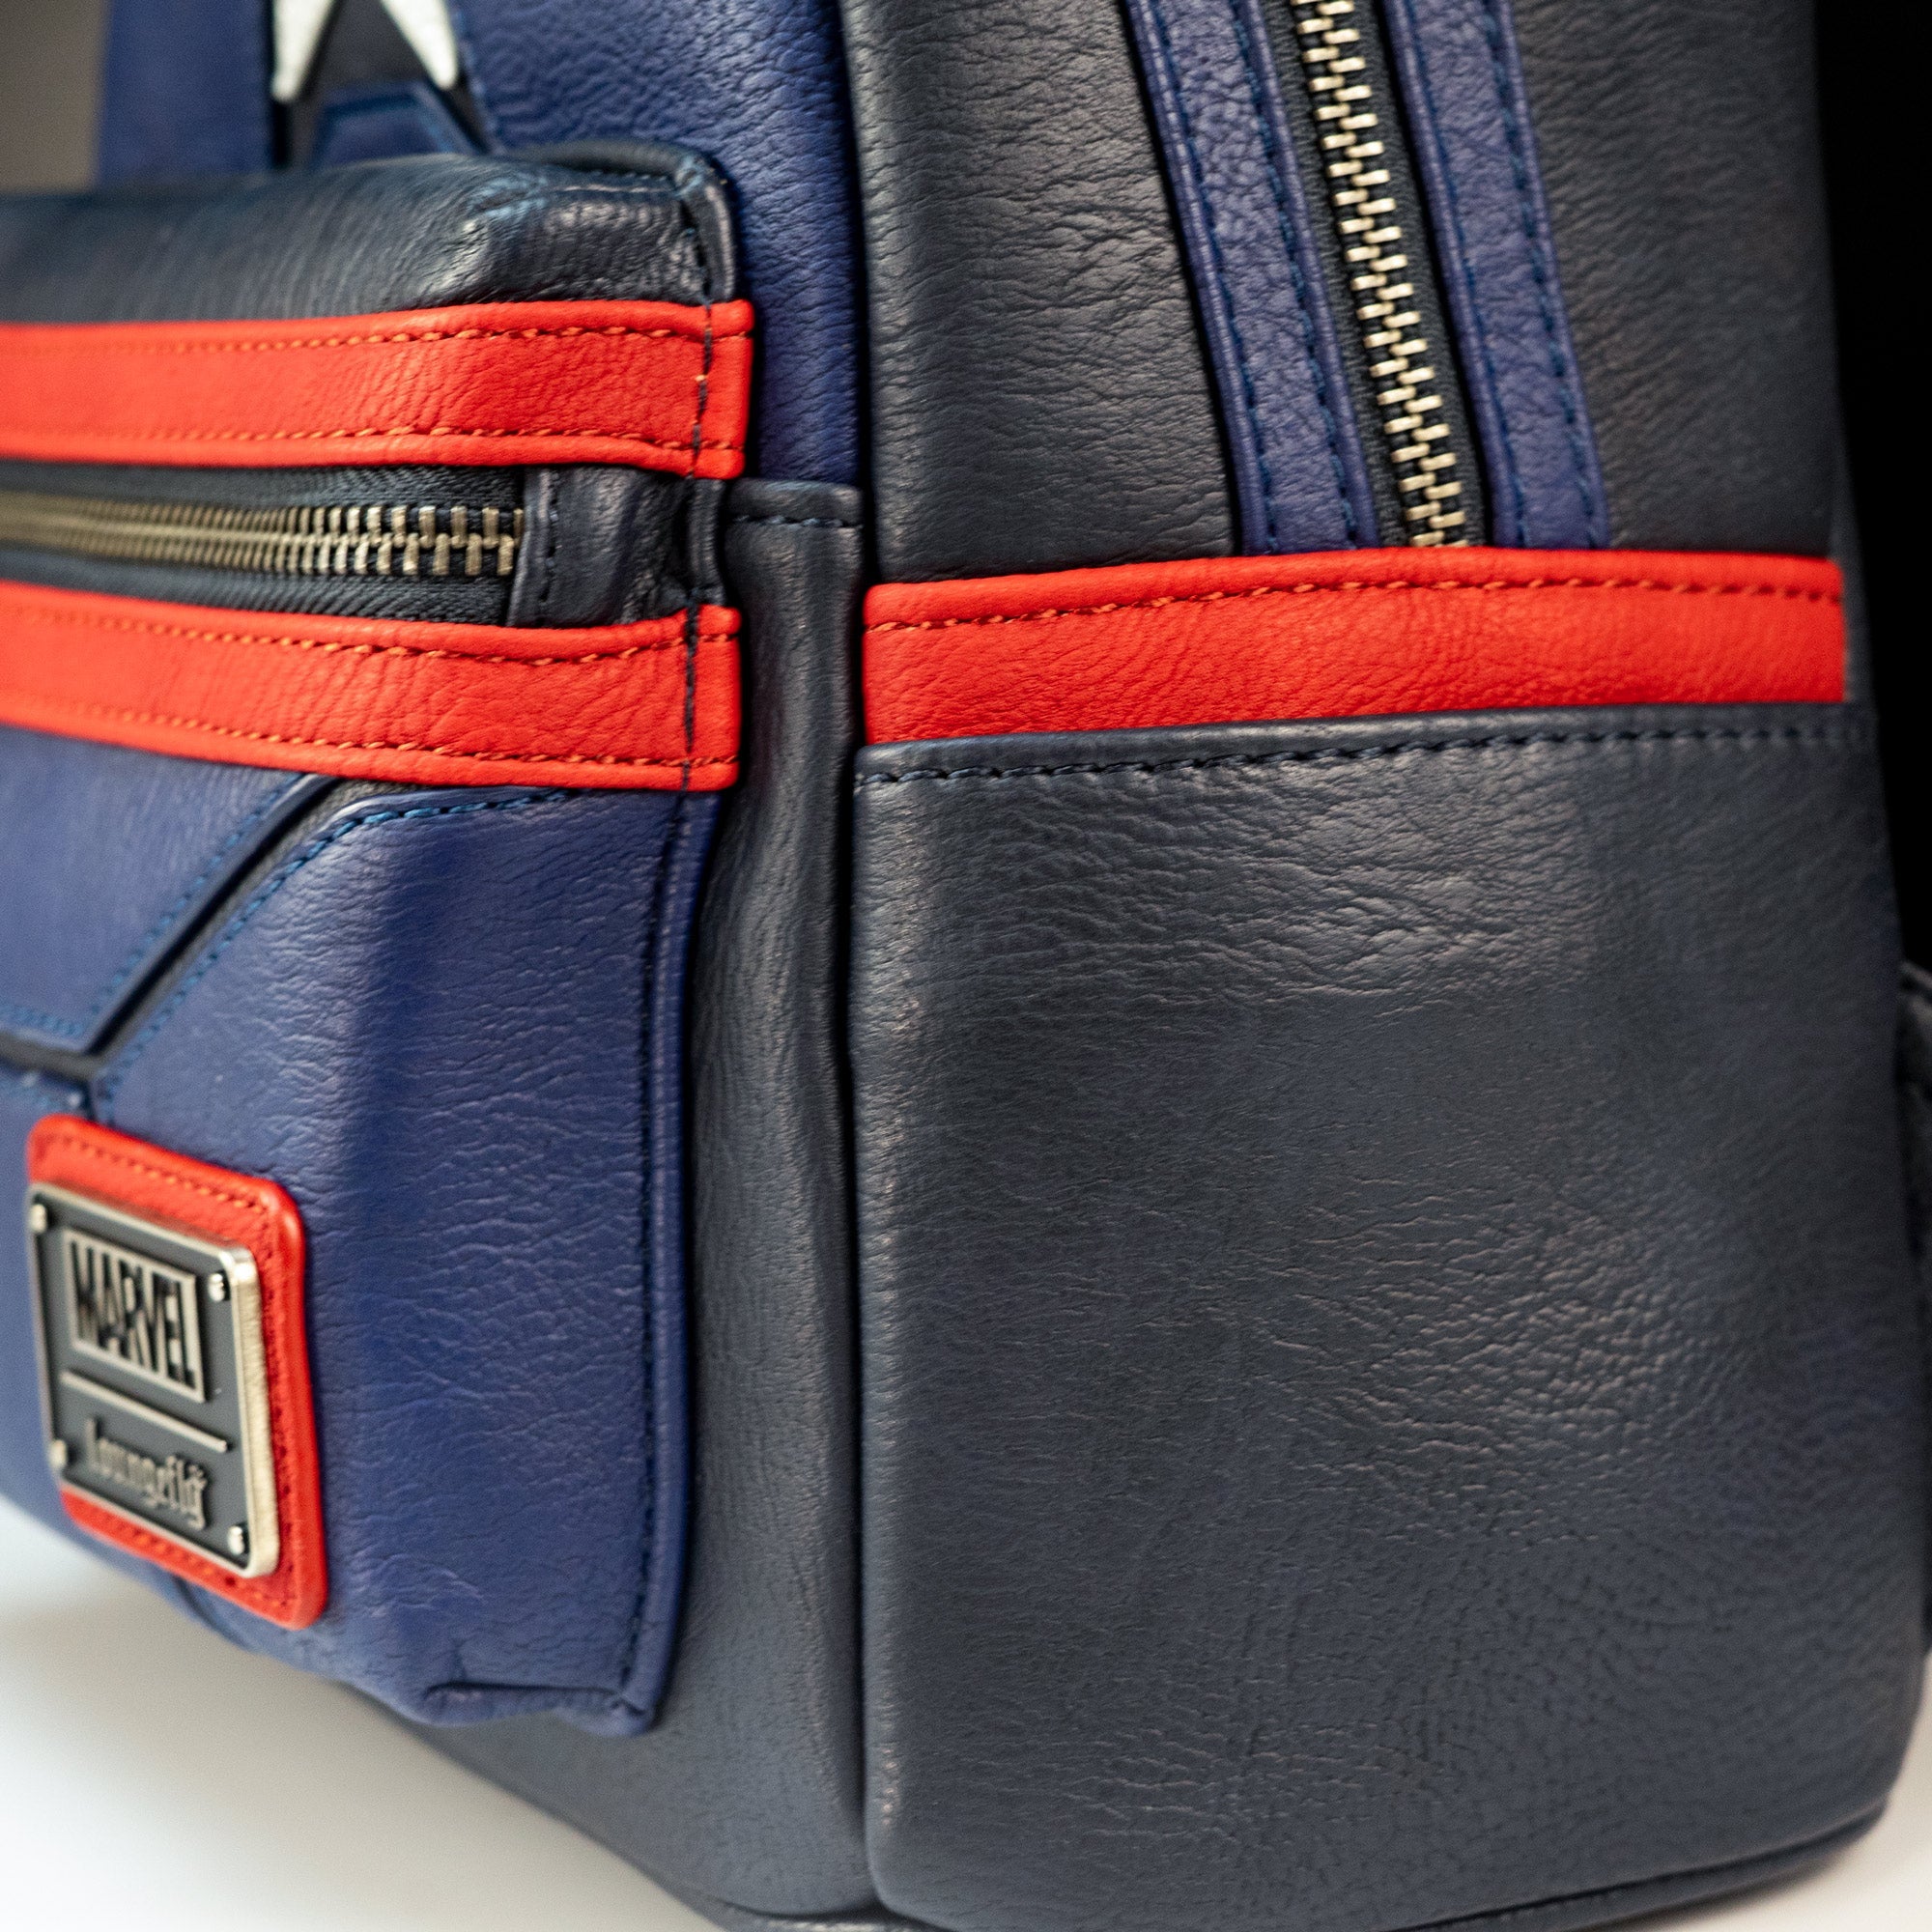 Loungefly x Marvel Captain America Cosplay Mini Backpack - GeekCore